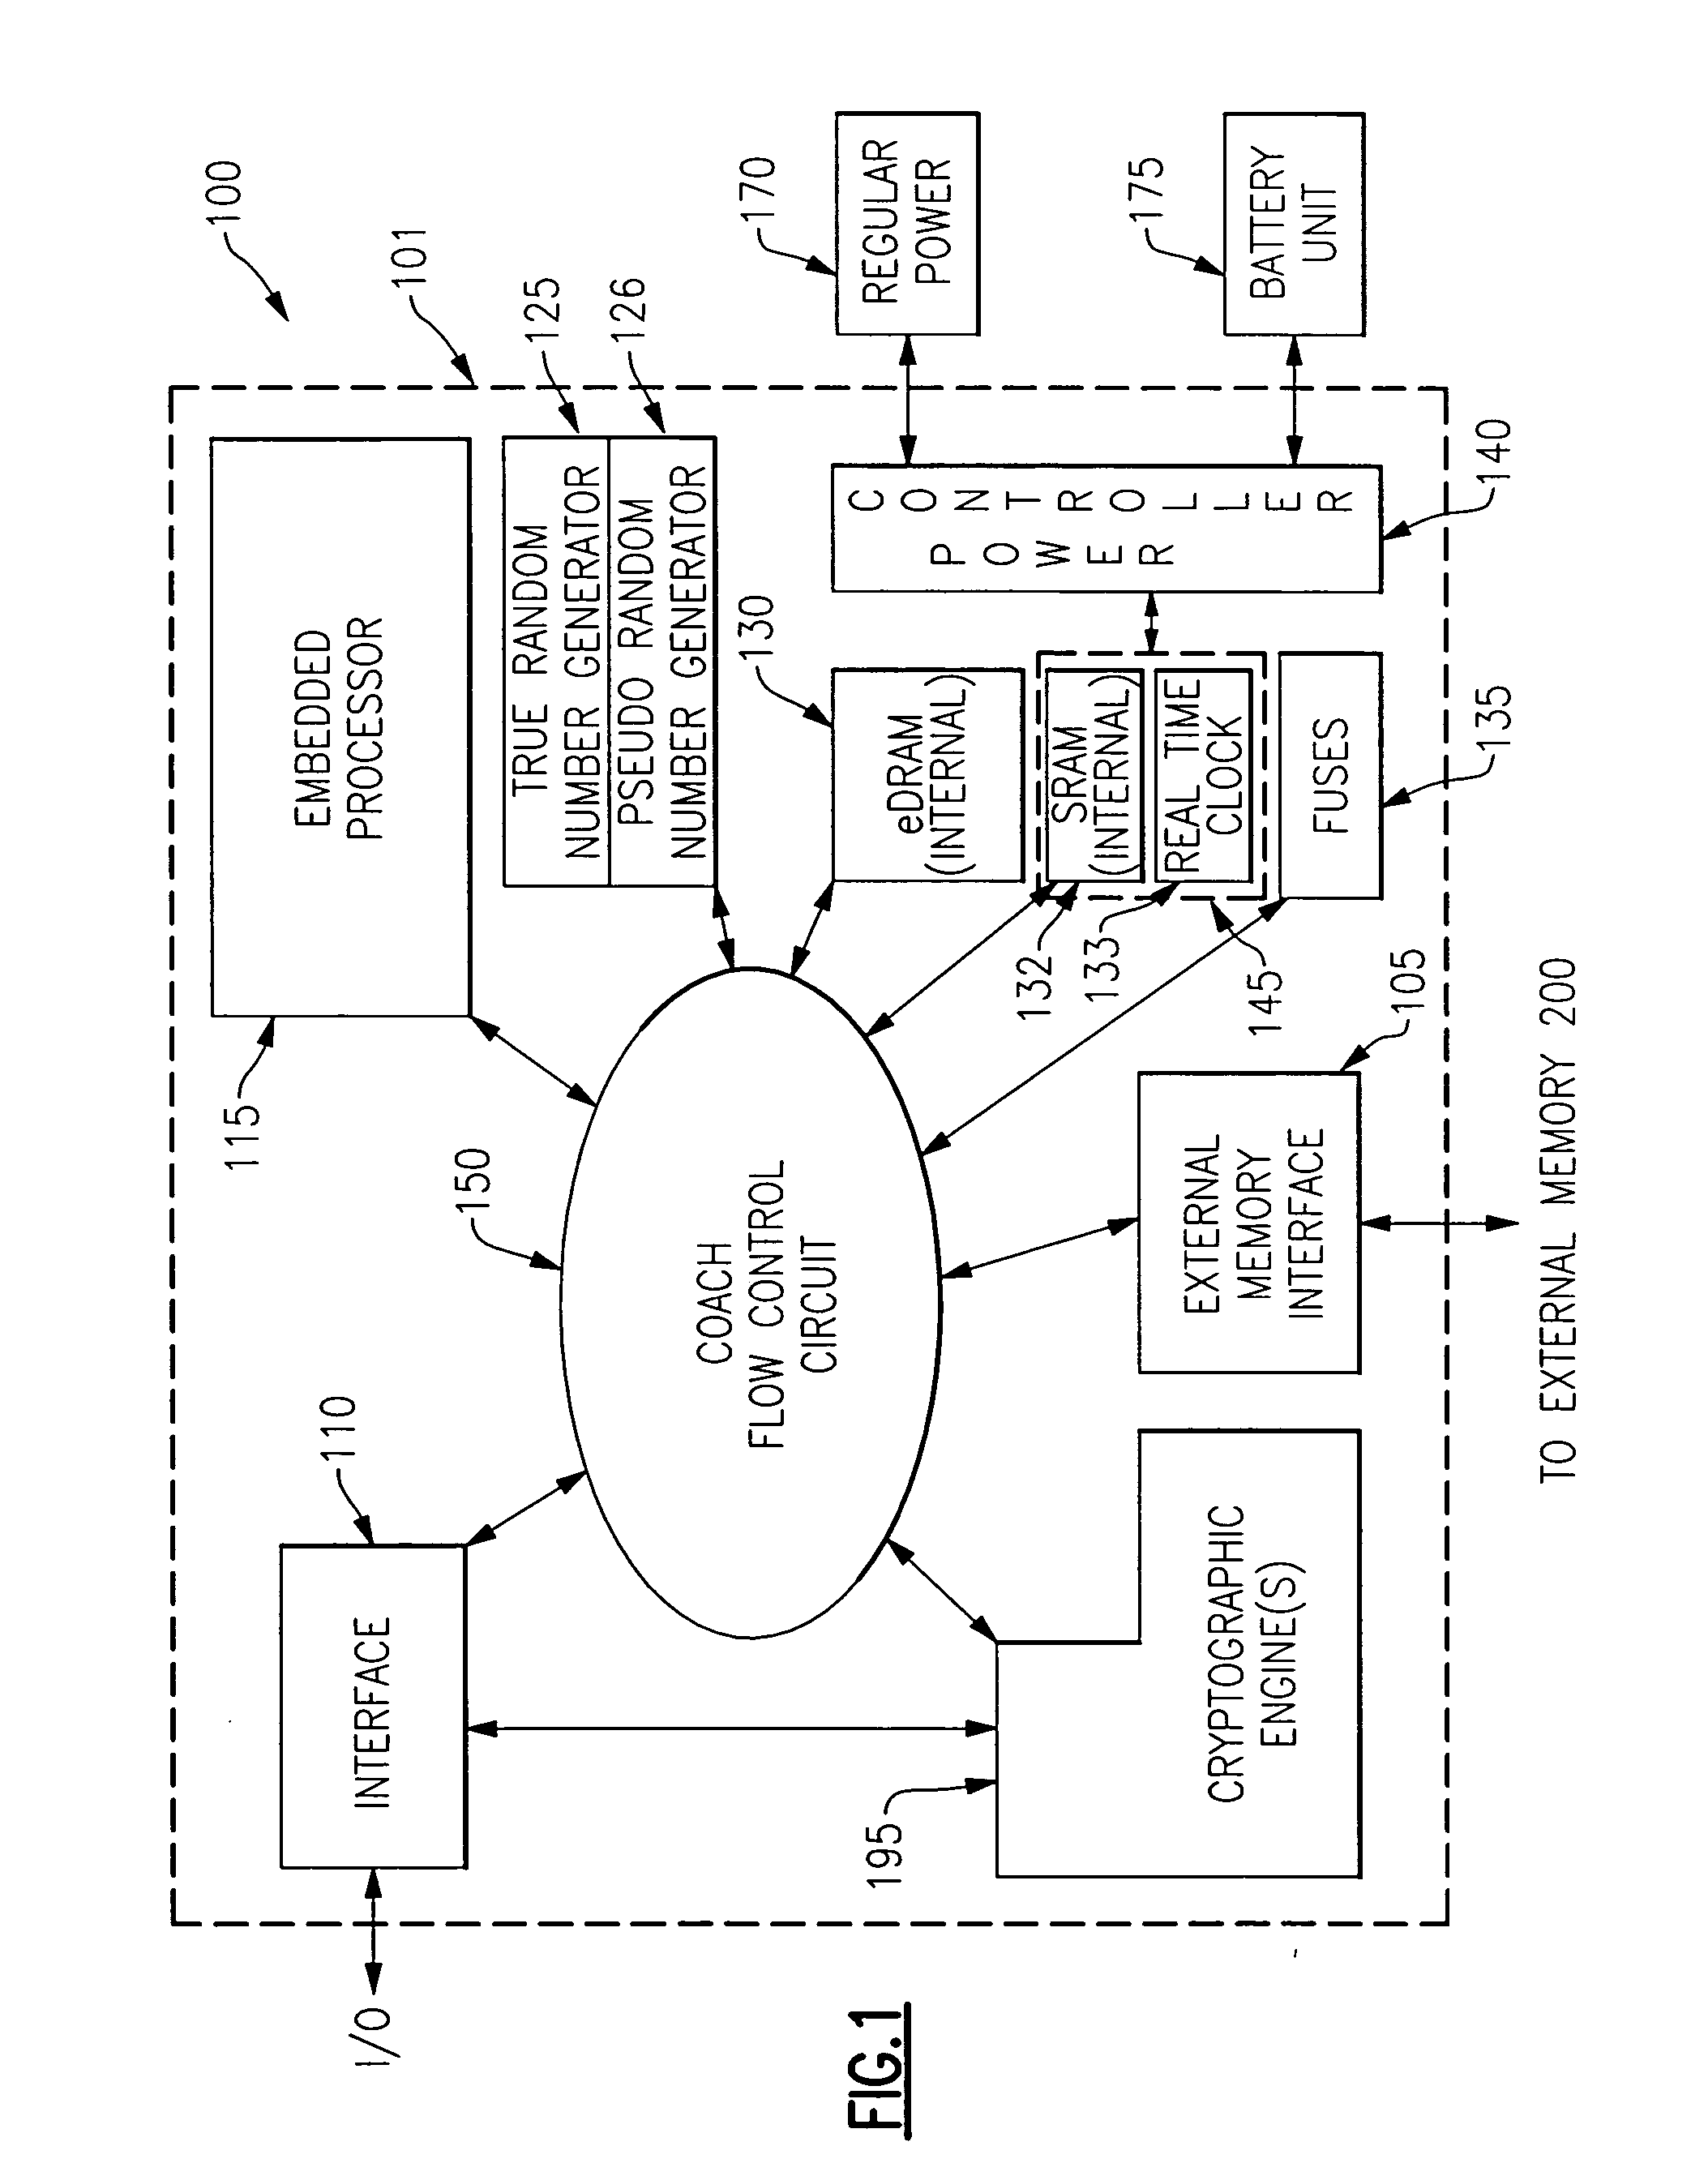 System and method for providing dynamically authorized access to functionality present on an integrated circuit chip